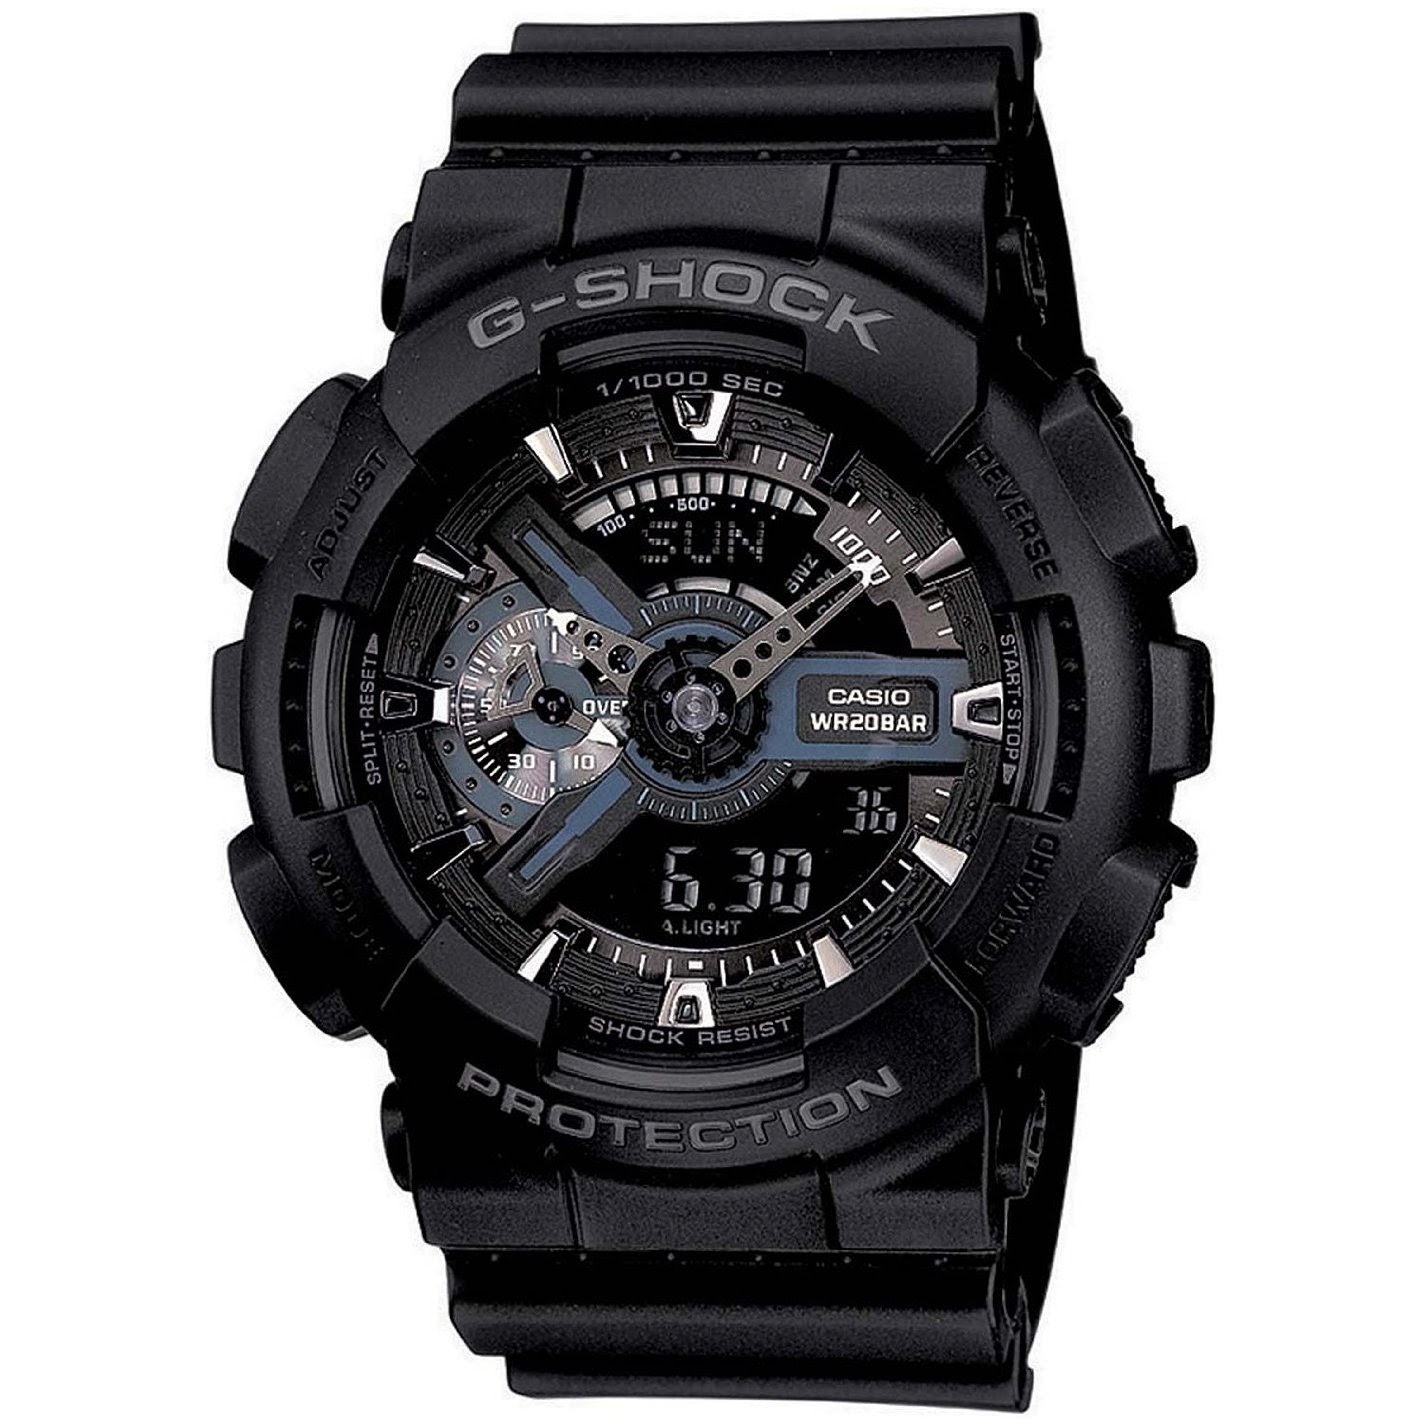 Casual Best Casio Watch Reviews G Shock Top Black Watches for Men ~ Timepiece Collection